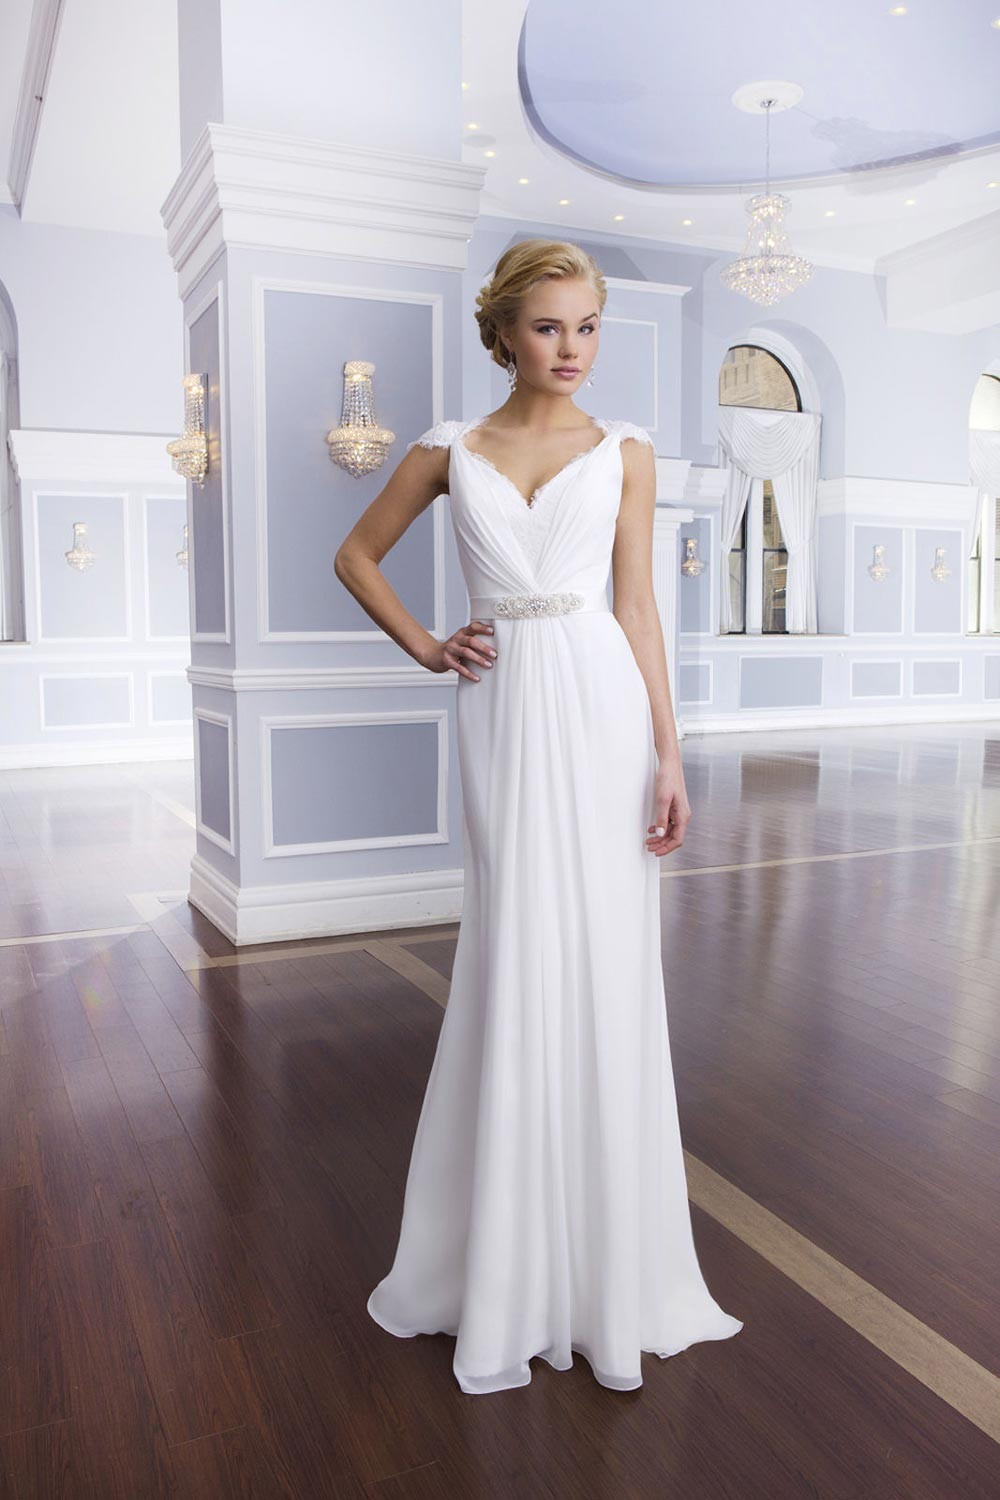 Grecian Wedding Dresses
 The Best Grecian Style Wedding Dresses hitched